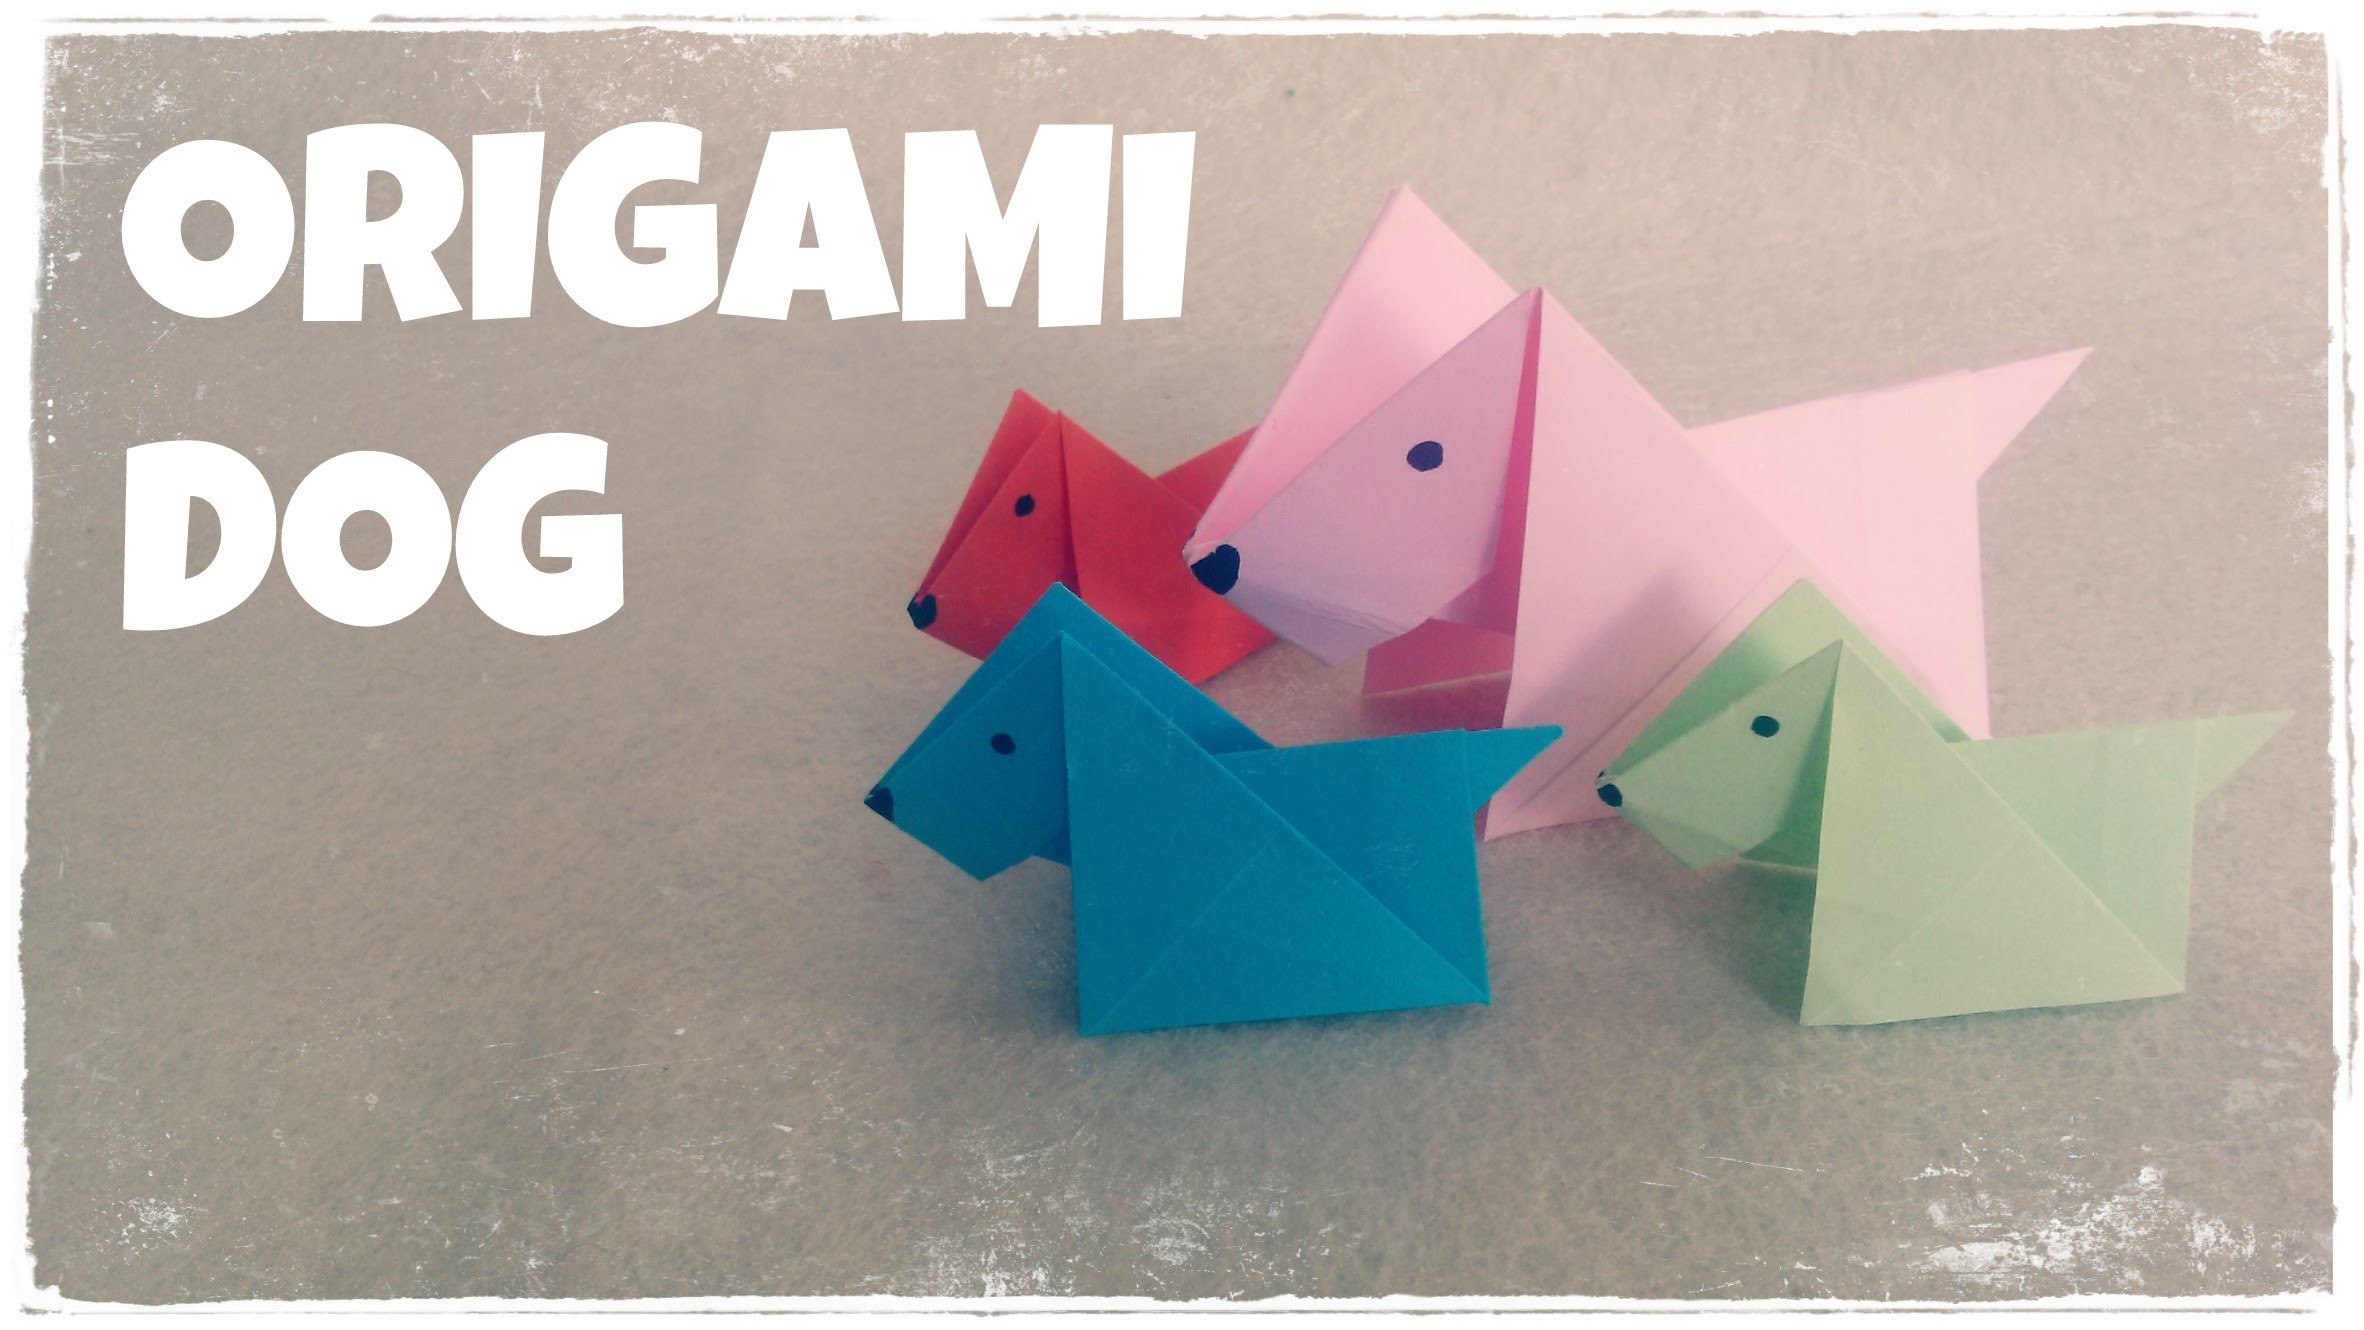  Origami  for Kids  Origami  Dog Tutorial Very Easy  